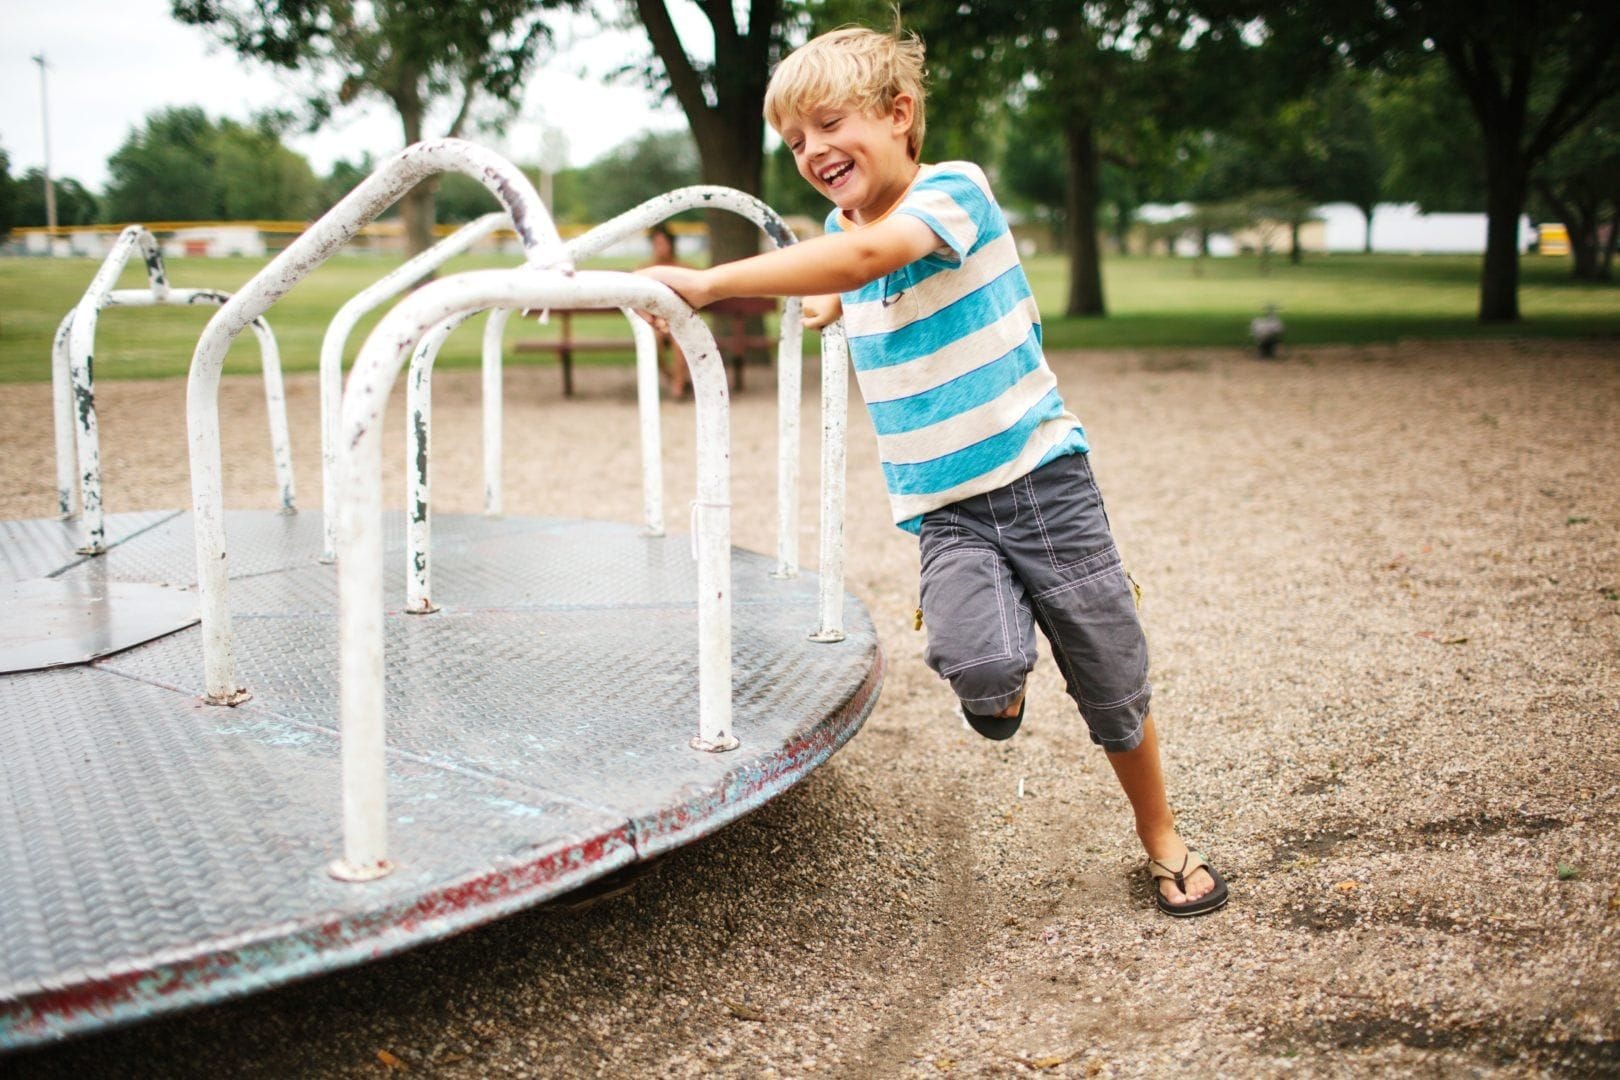 Top 5 benefits of children playing outside - Sanford Health News